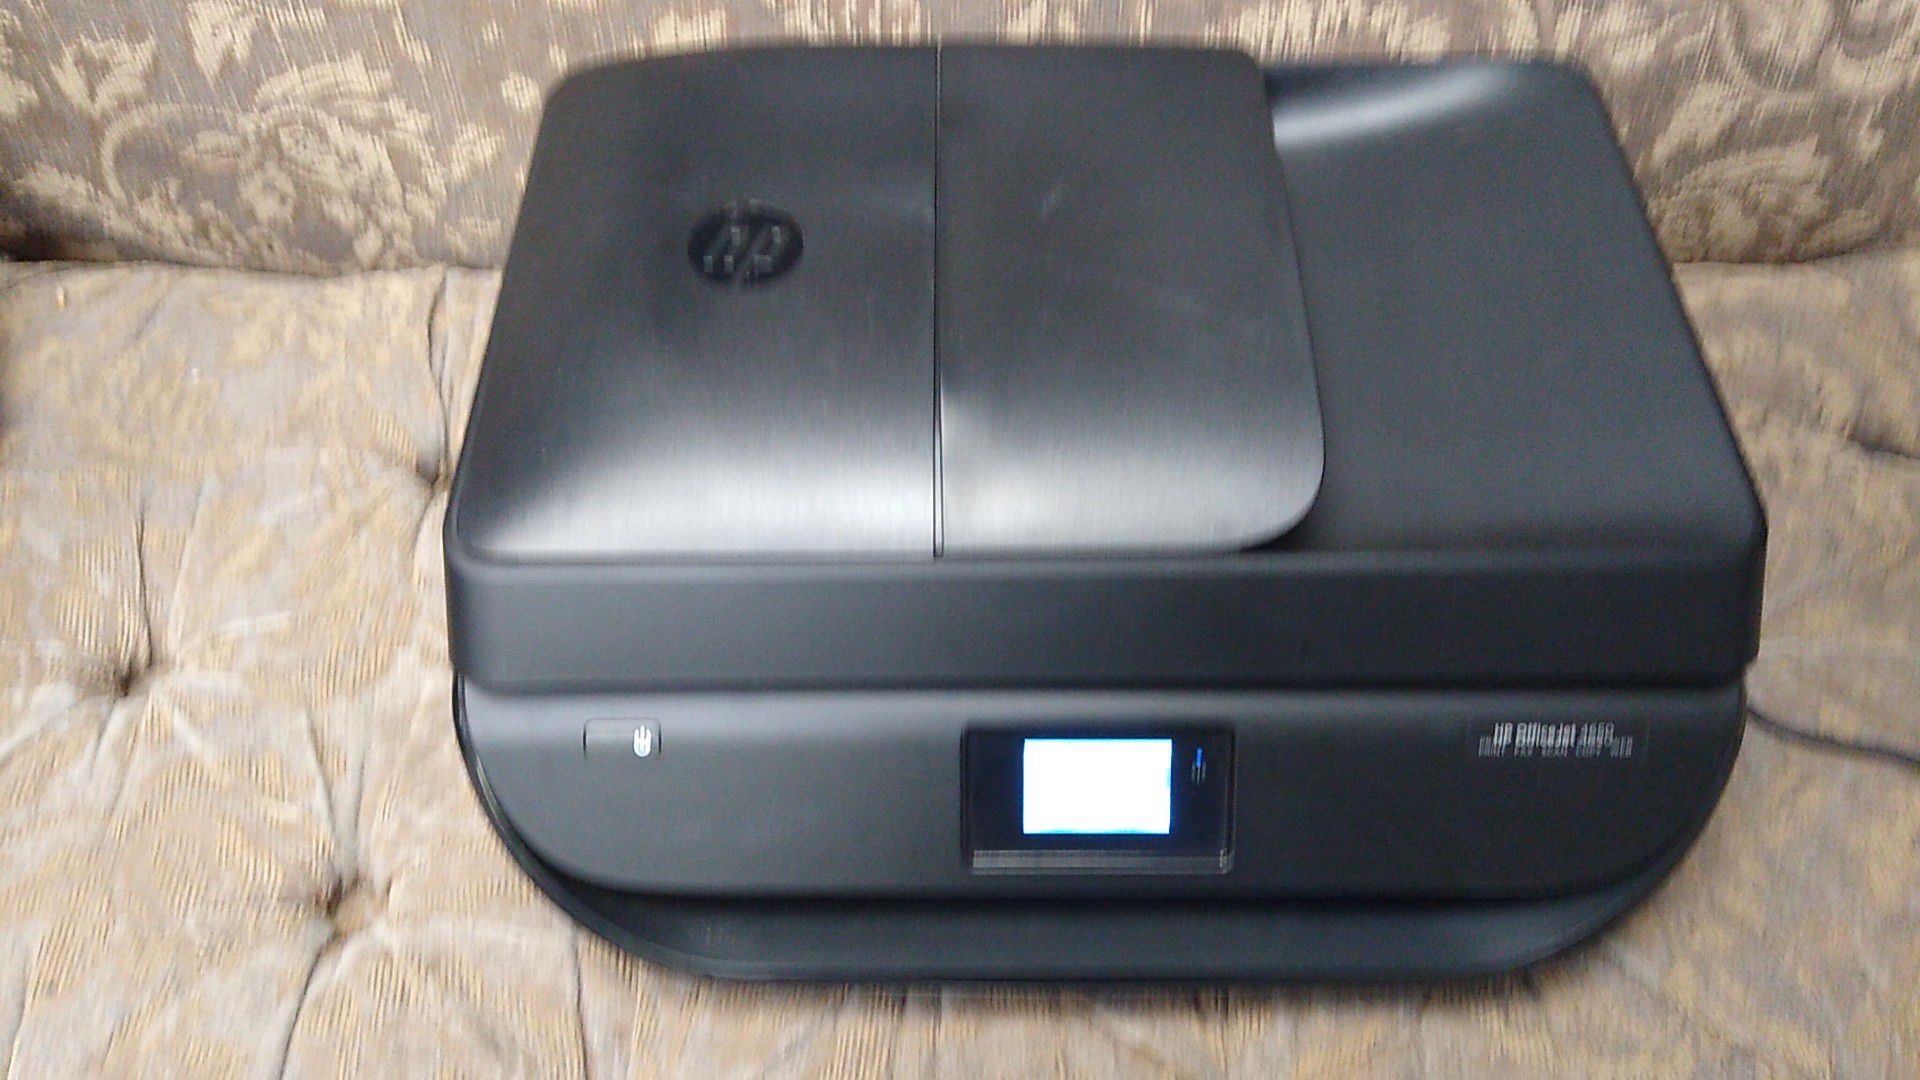 H p.printer.fax.copy.and scan office jet 4650